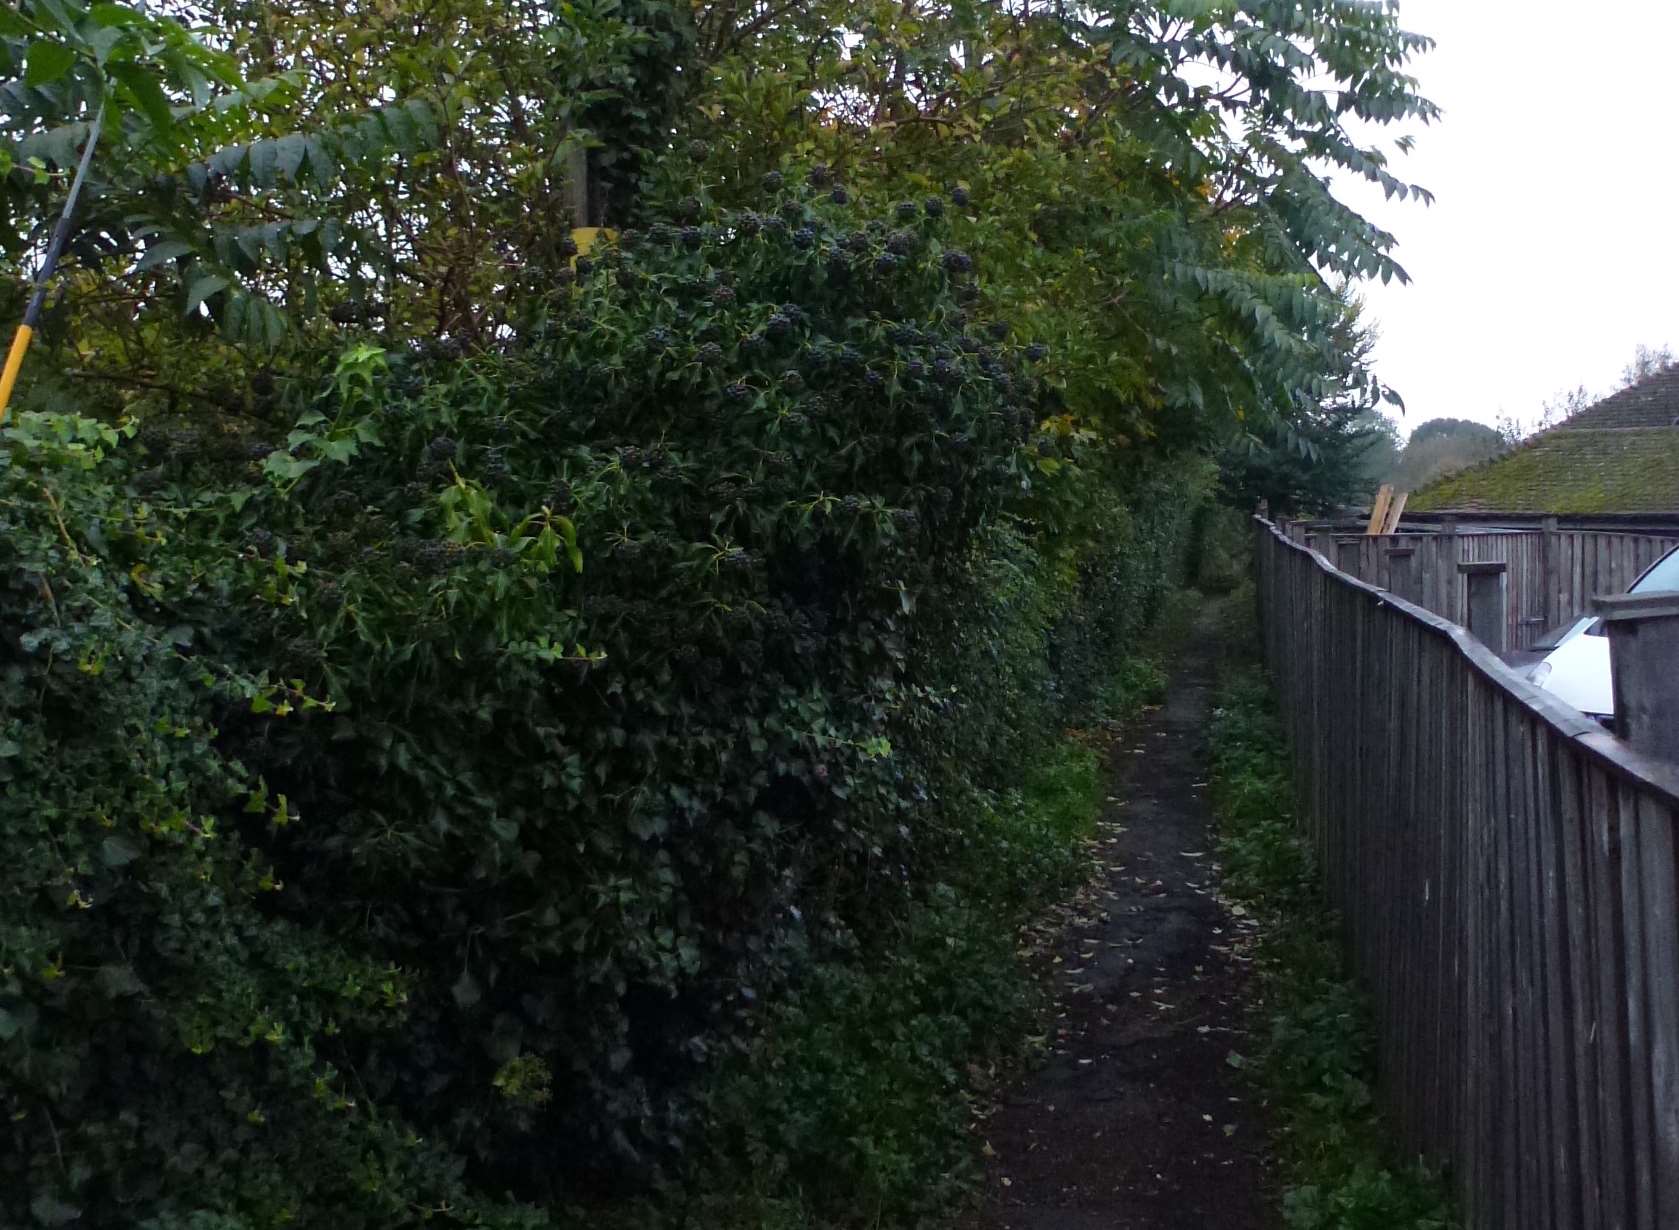 A woman was sexually assaulted in an alleyway off Berengrave Lane, Rainham